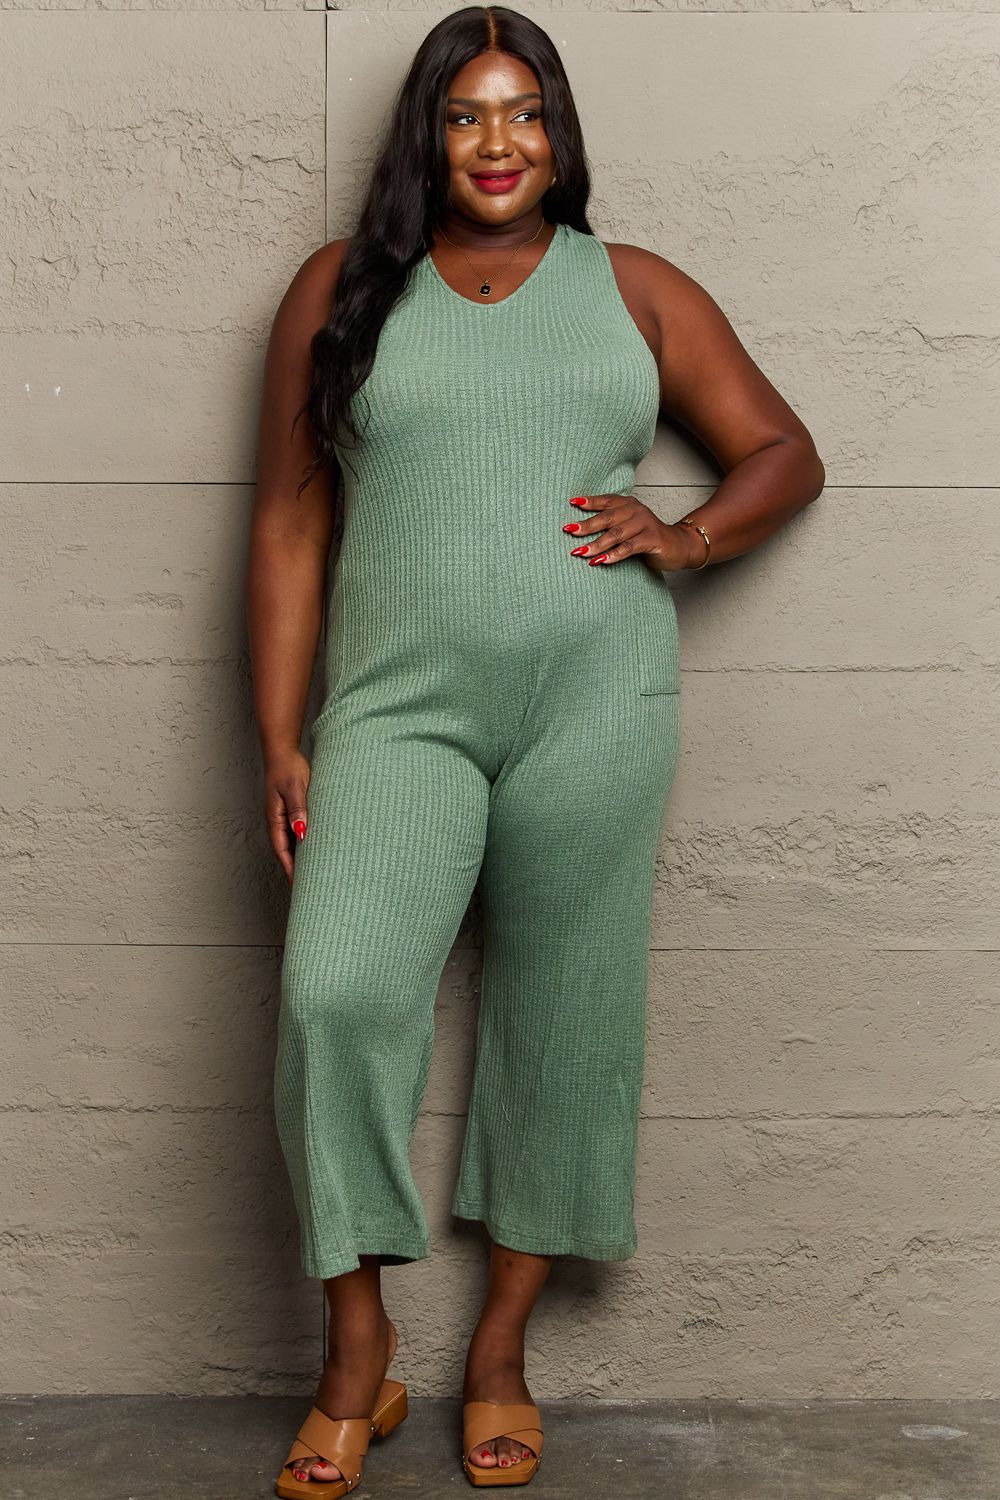 Don’t Get It Twisted Full Size Rib Knit Jumpsuit - Green / S - Women’s Clothing & Accessories - Jumpsuits & Rompers